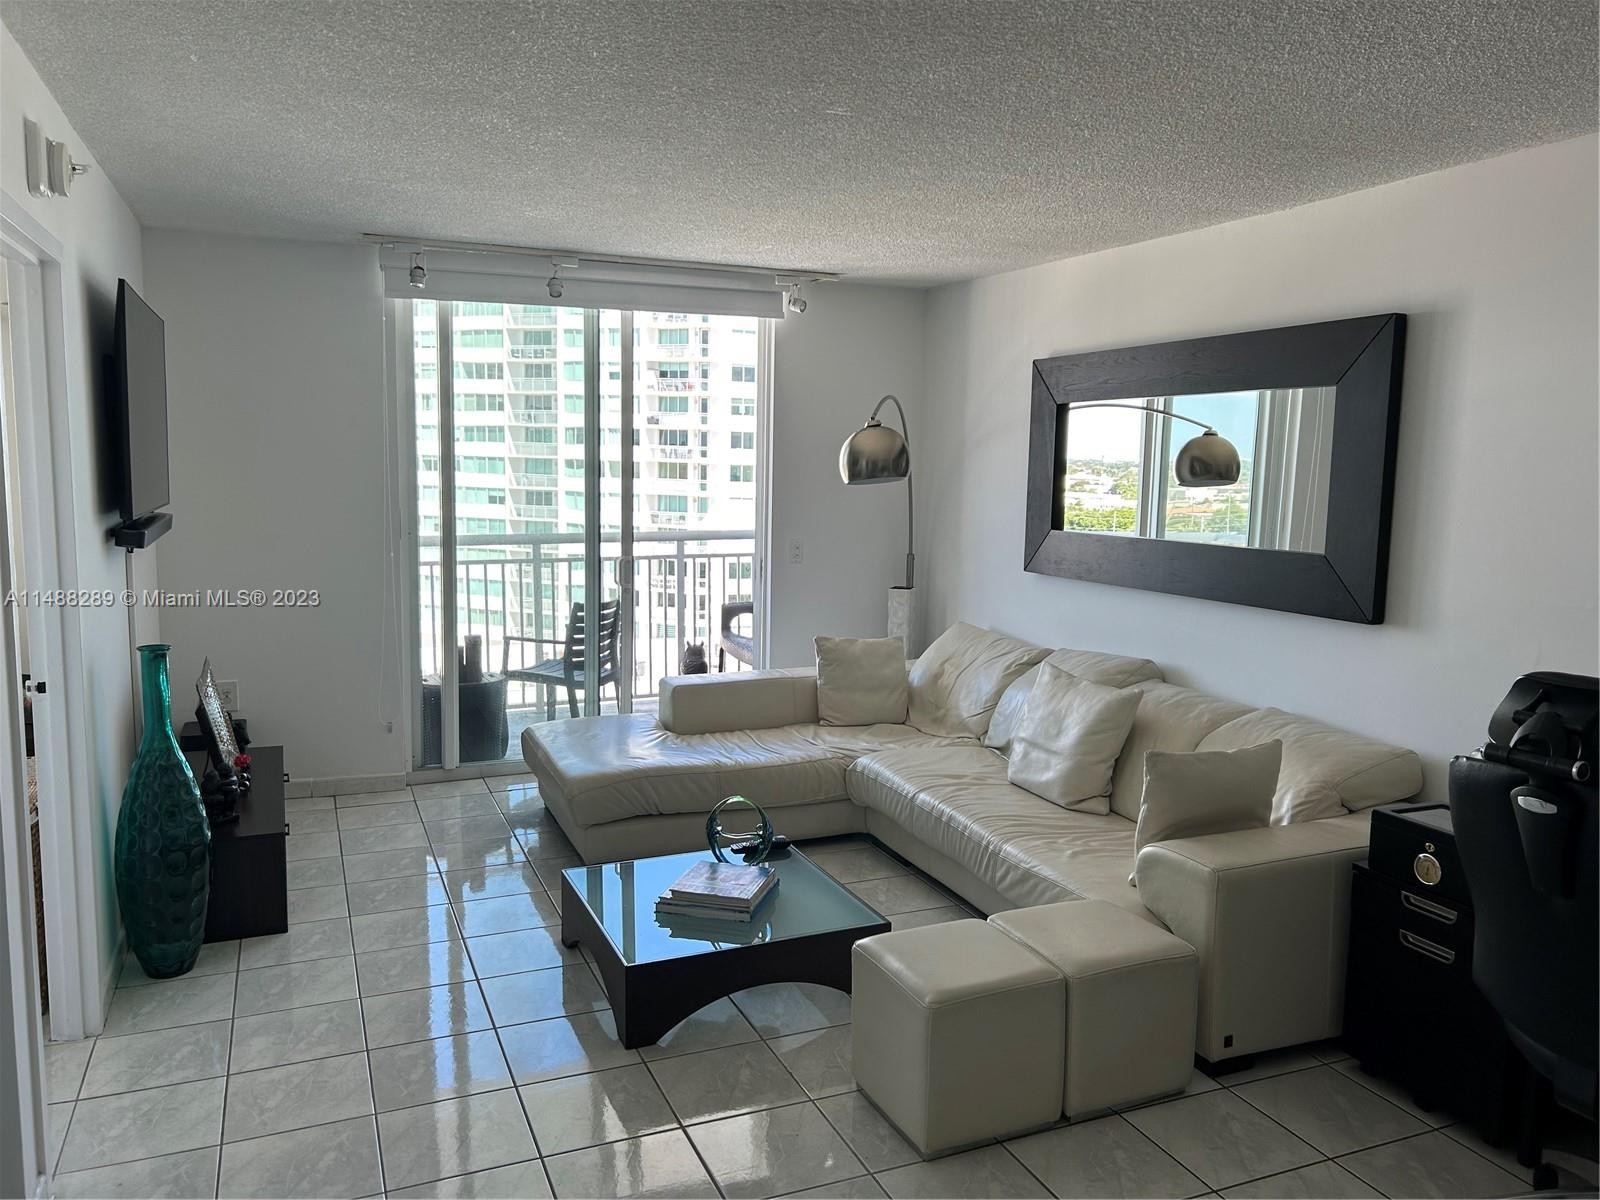 5. 6969 Collins Ave